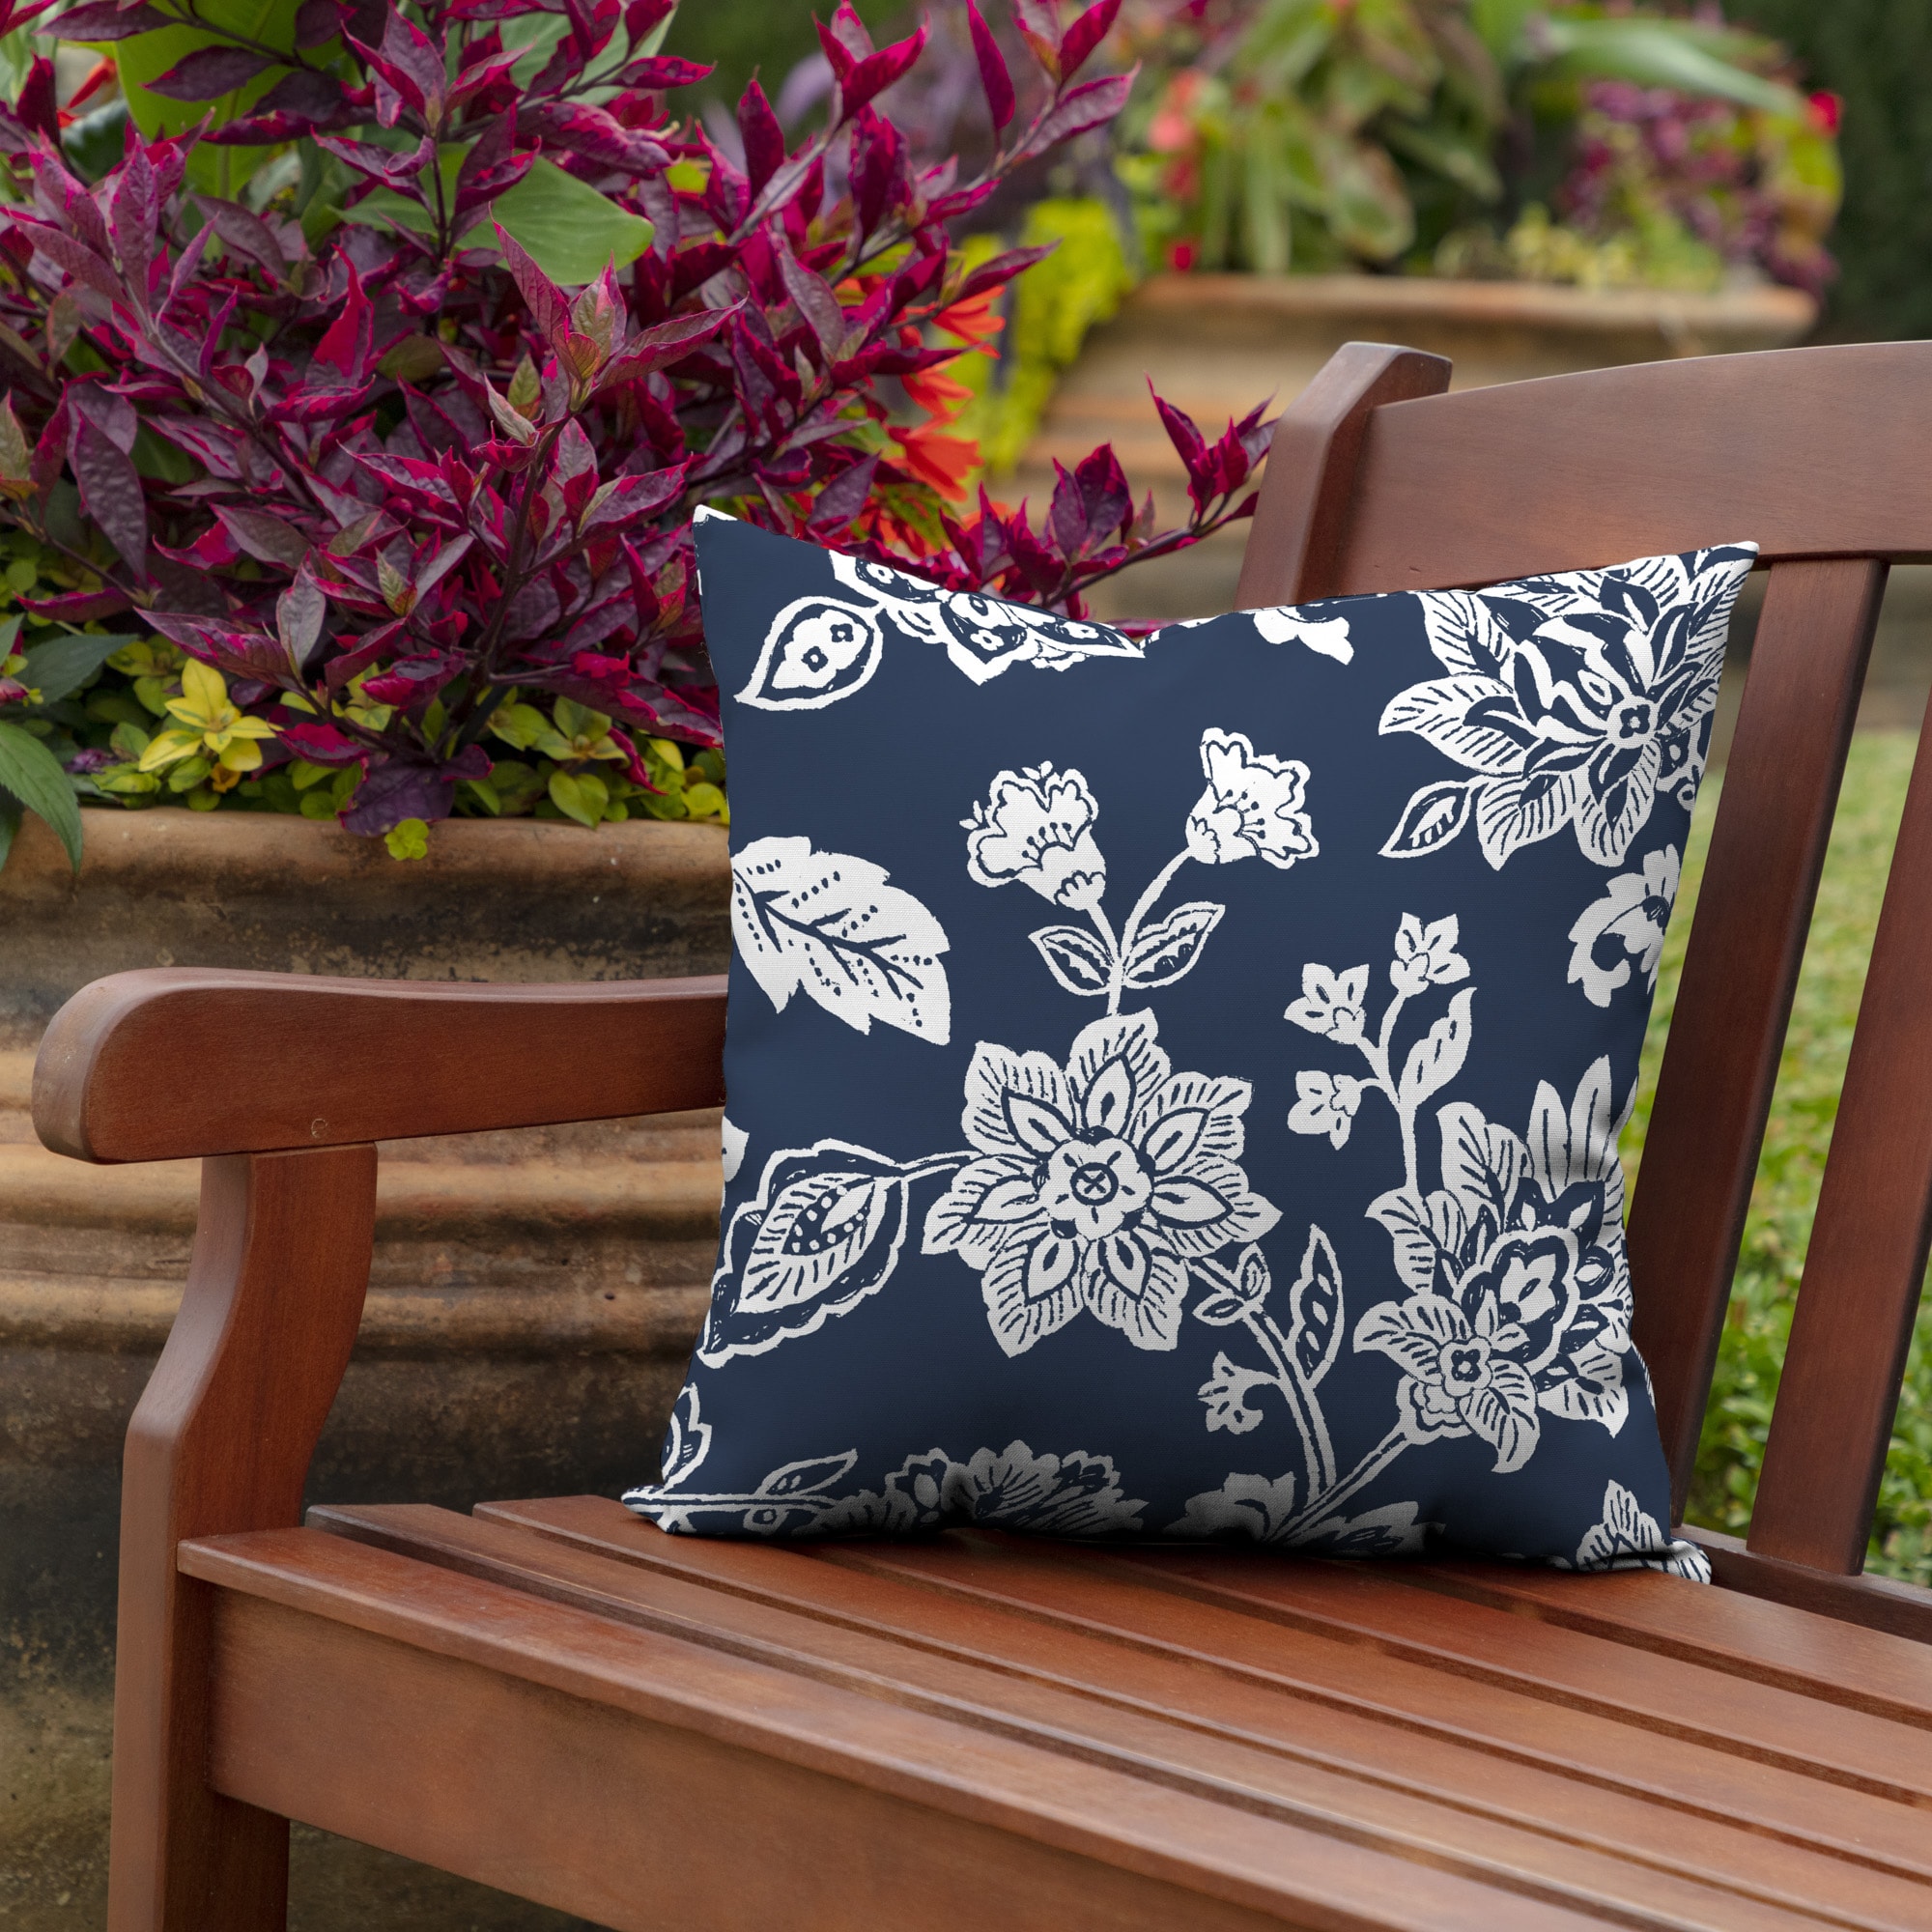 Arden Selections 2-Pack Solid Sapphire Blue Leala Square Throw Pillow in  the Outdoor Decorative Pillows department at